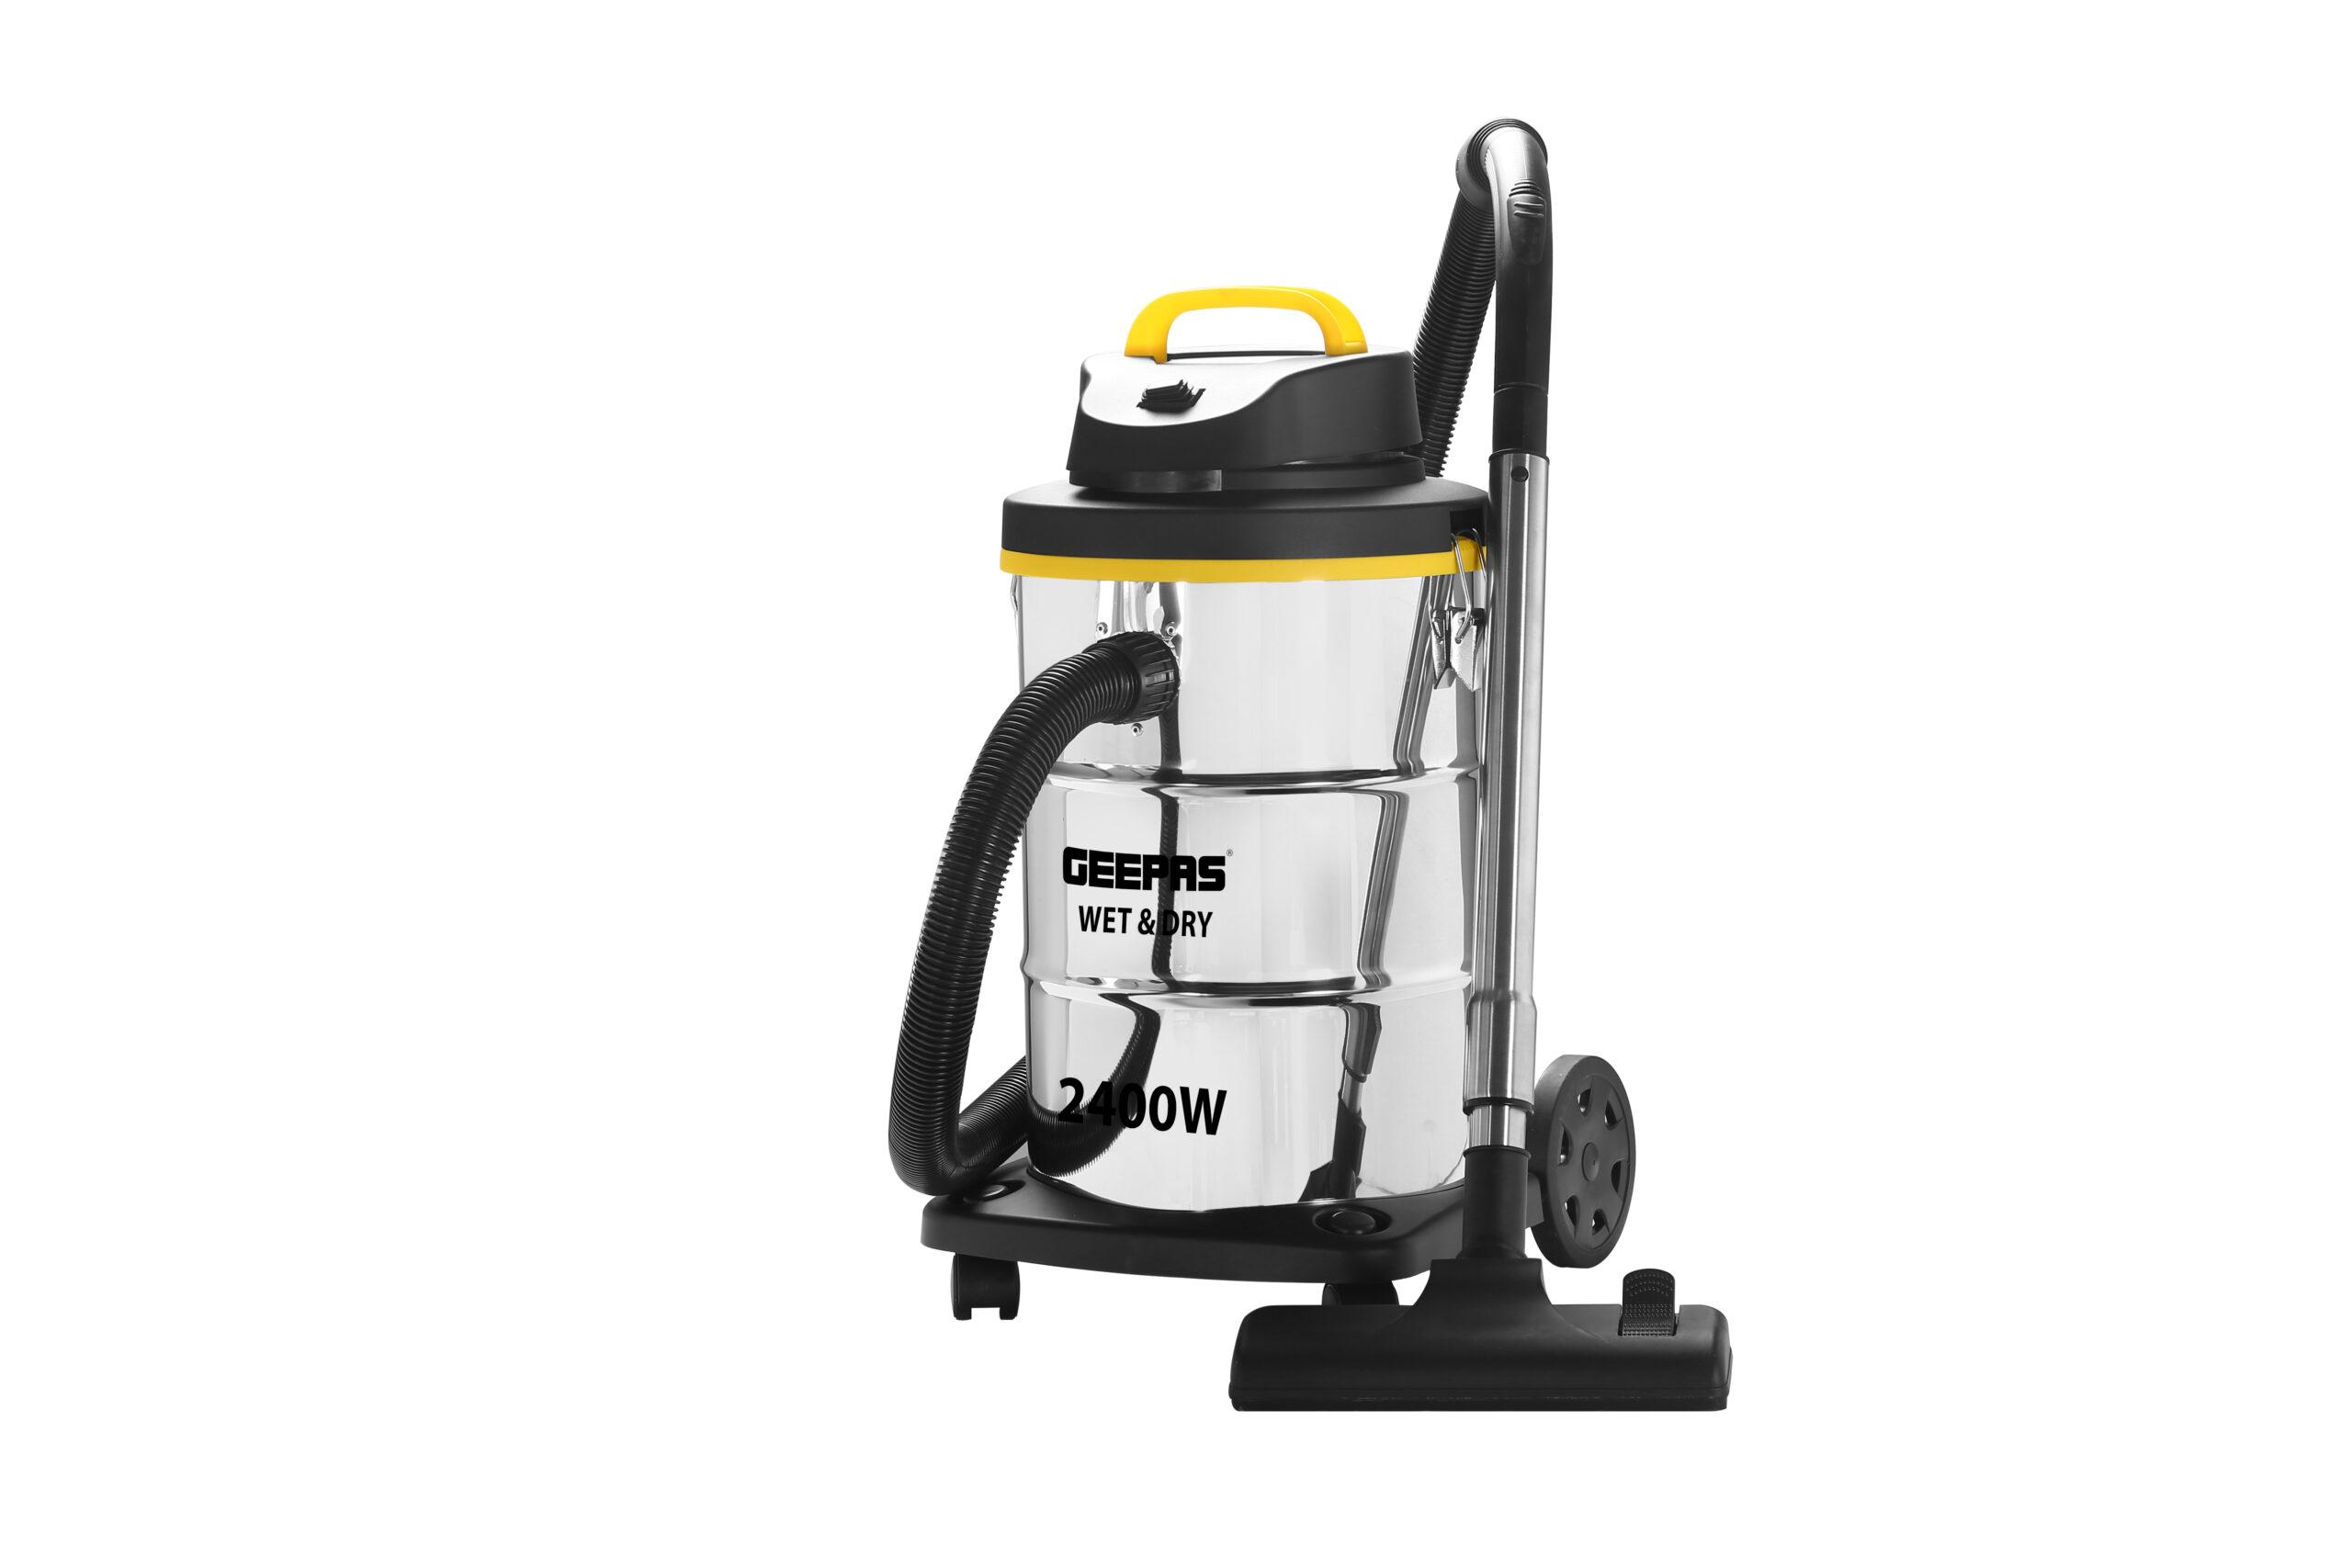 Shop Drum vacuum cleaner with a guarantee and fast delivery in the UAE and  Saudi Arabia.